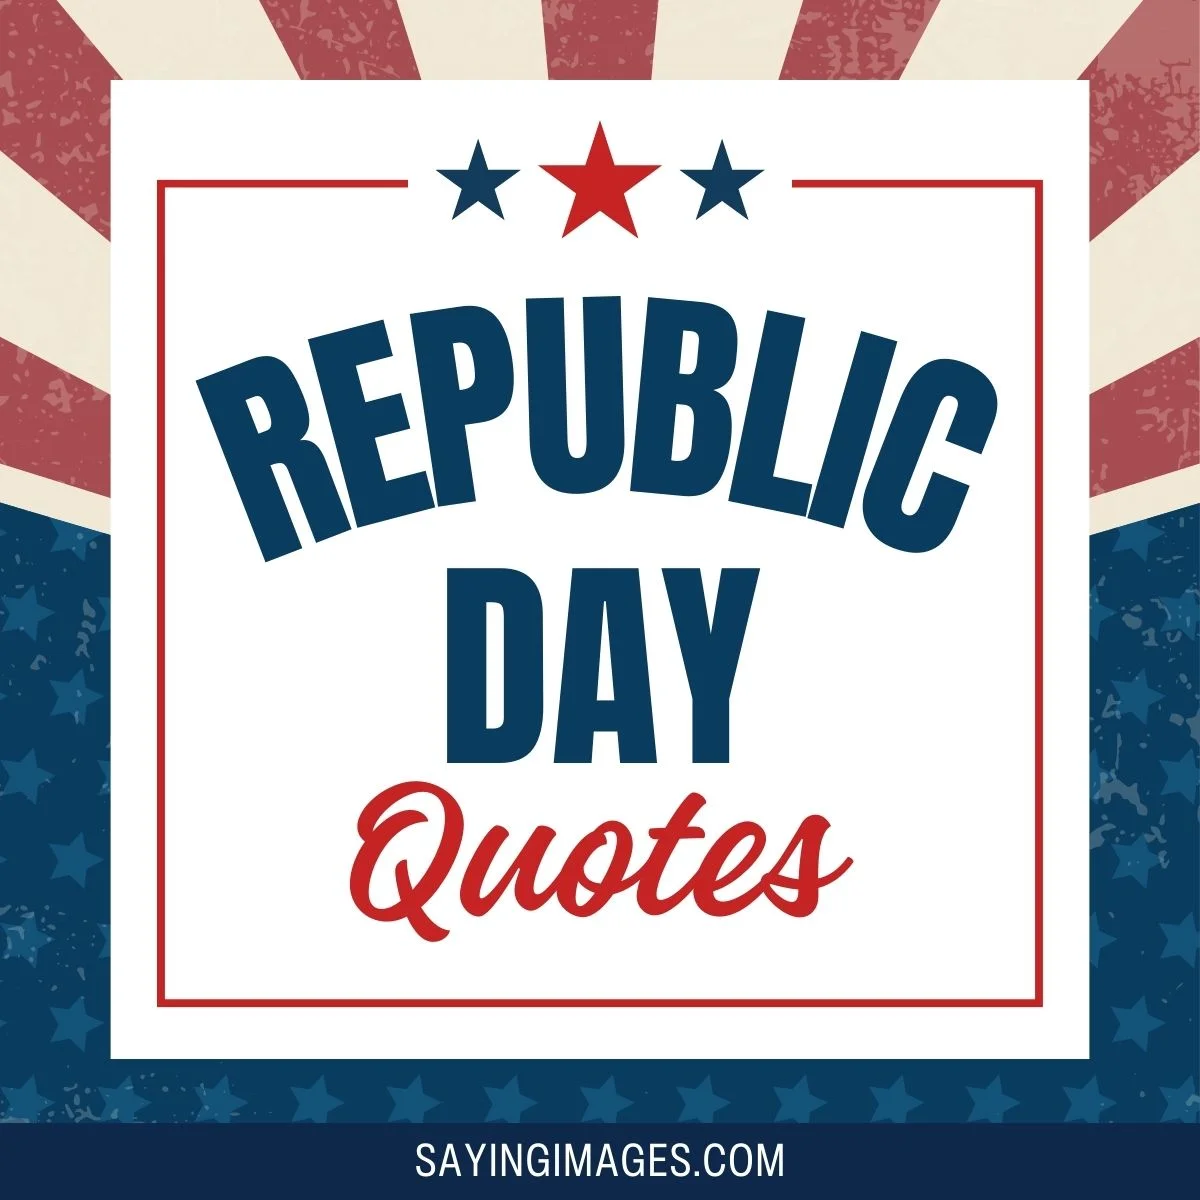 Republic Day Quotes and Greetings